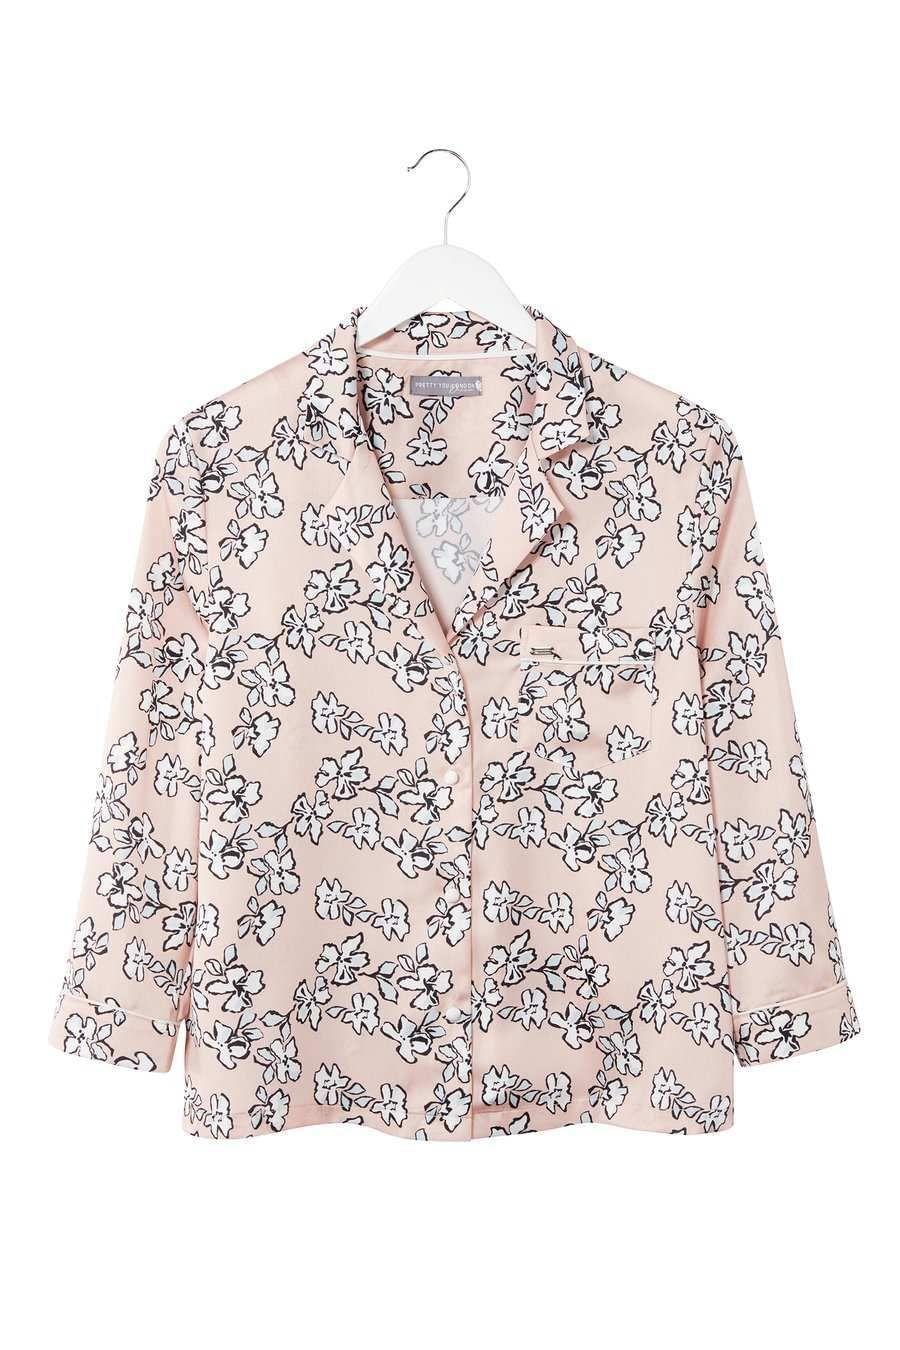 Mix and Match Floral Shirt in Blush Pink (Shirt only)